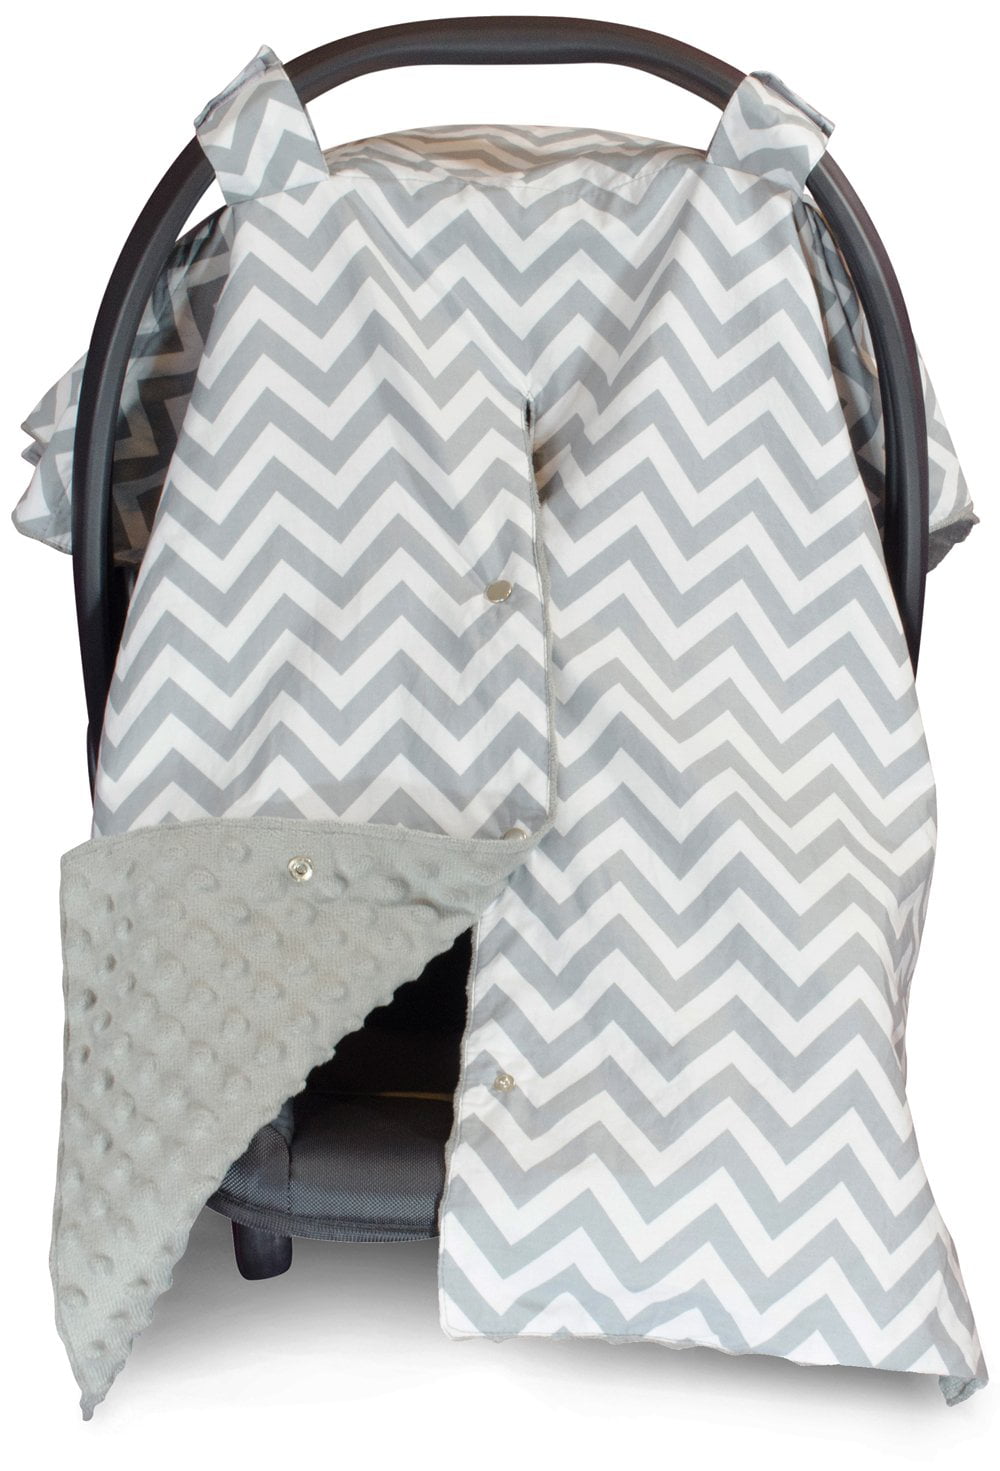 Grey Zig Zag Car Seat Covers for Babies